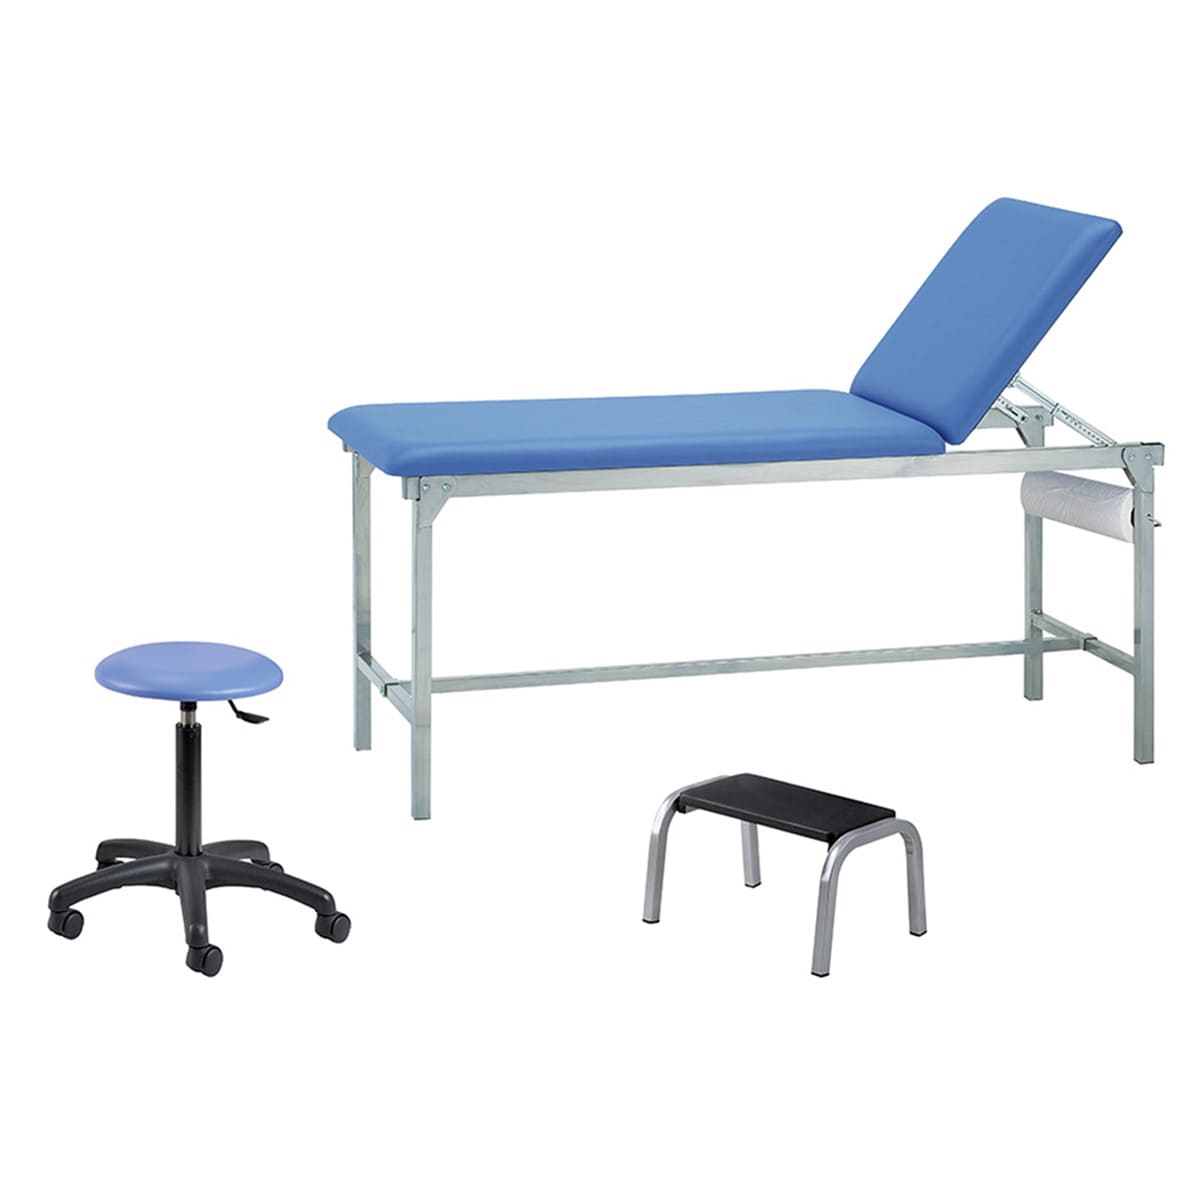 Office pack: Exam couch, Stool, Stepstool